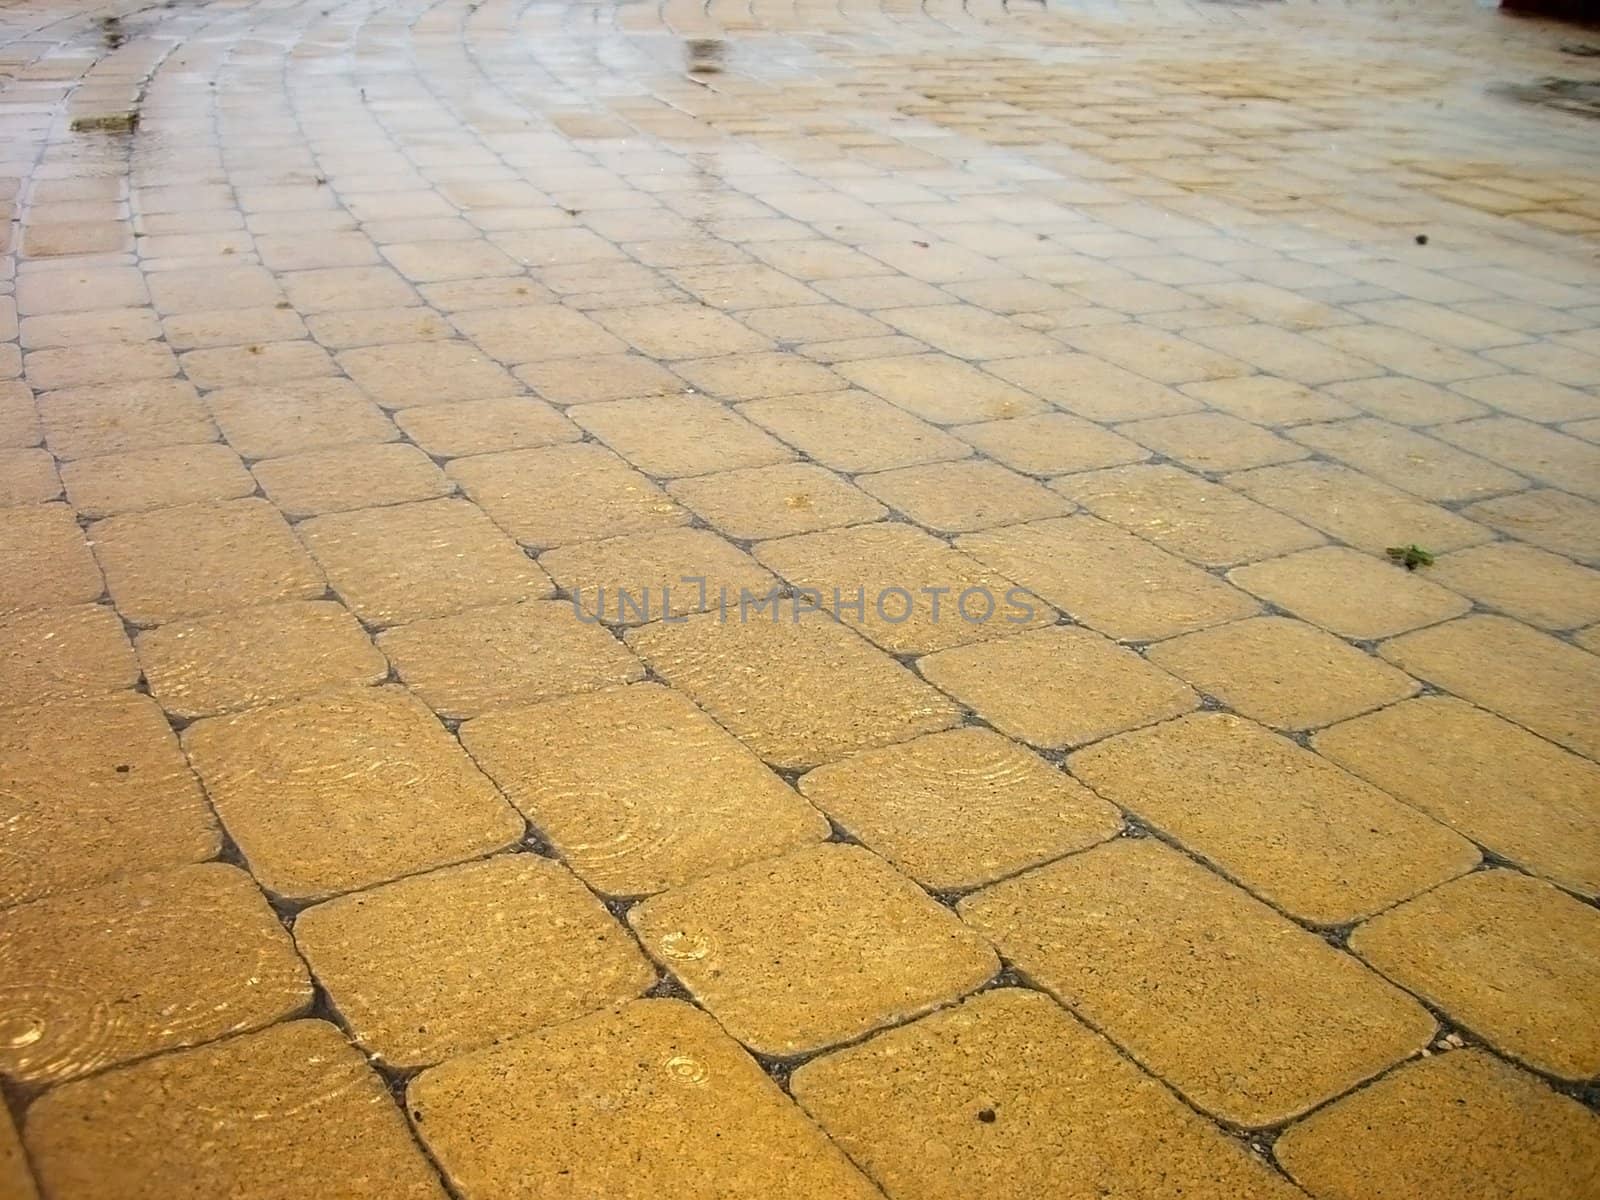 bubble; asphalt, stone, bricks, background, form square, rain, drop; ripple on water, bright background; texture; abstraction; roadway, bar